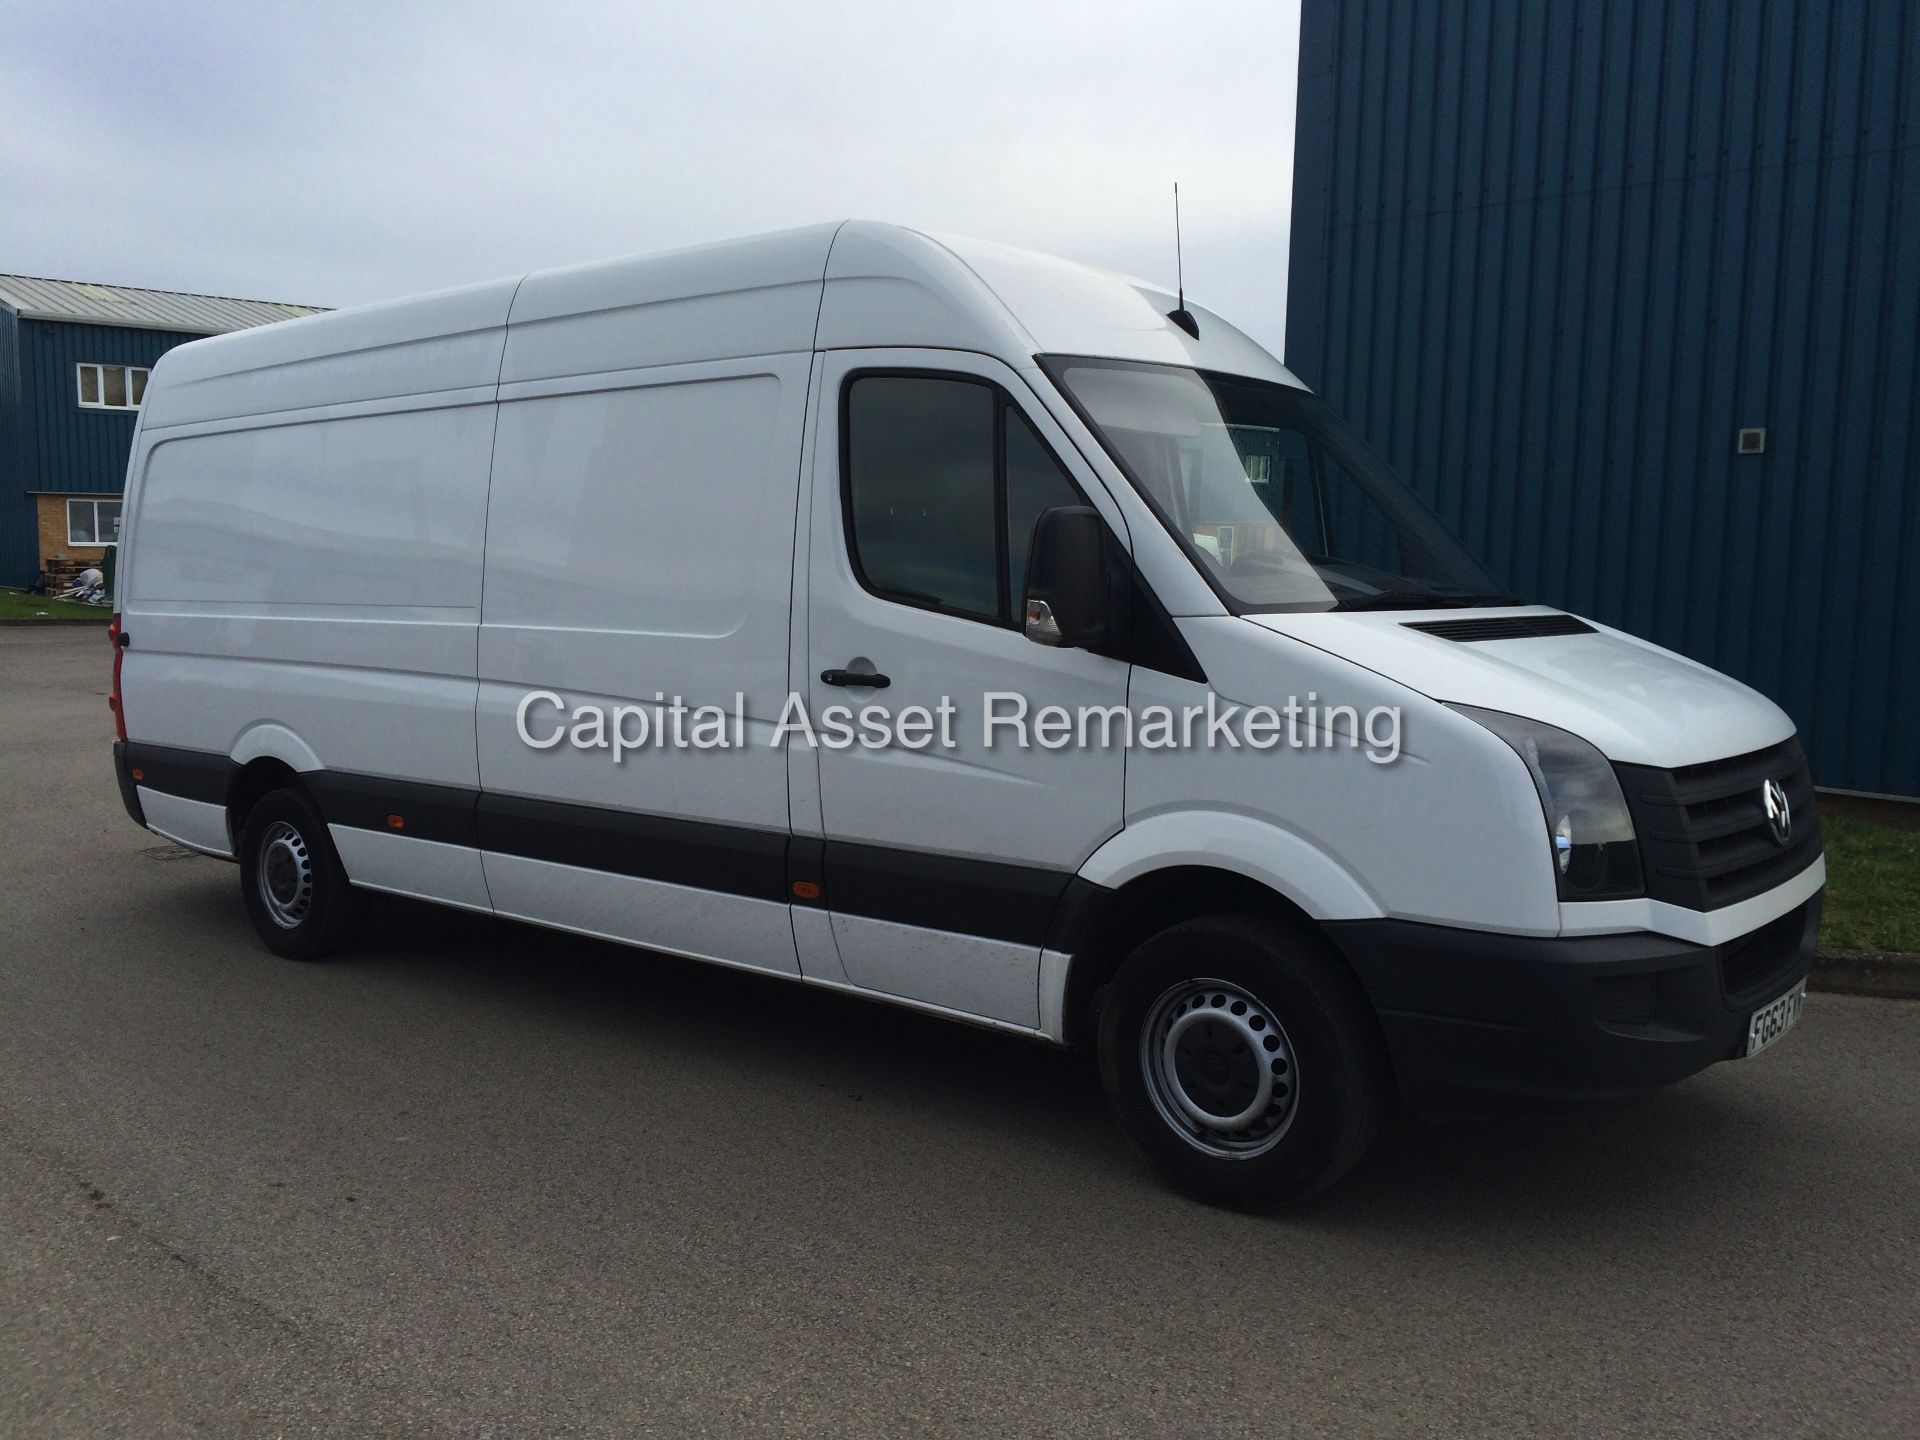 VOLKSWAGEN CRAFTER 2.0Ltr TDI CR35 LWB (2014 MODEL) NEW SHAPE - CRUISE CONTROL - 1 OWNER FROM NEW !! - Image 7 of 19